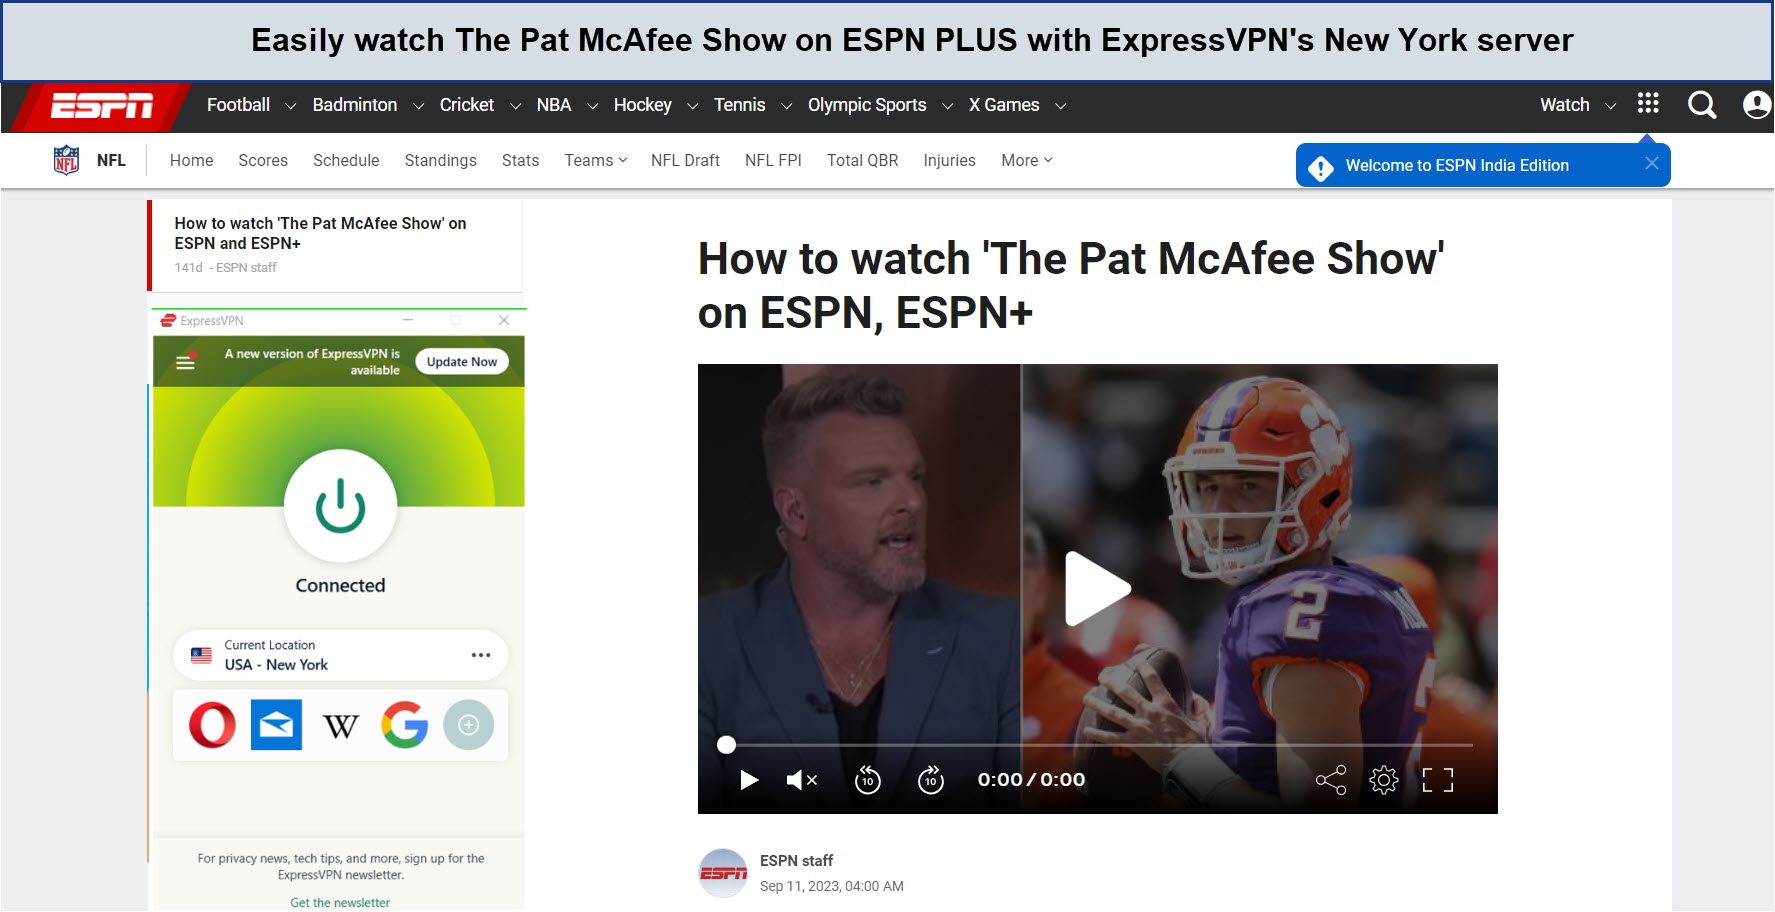 watch-The-Pat-McAfee-Show-on-ESPN-PLUS-with-ExpressVPN-in-Italy